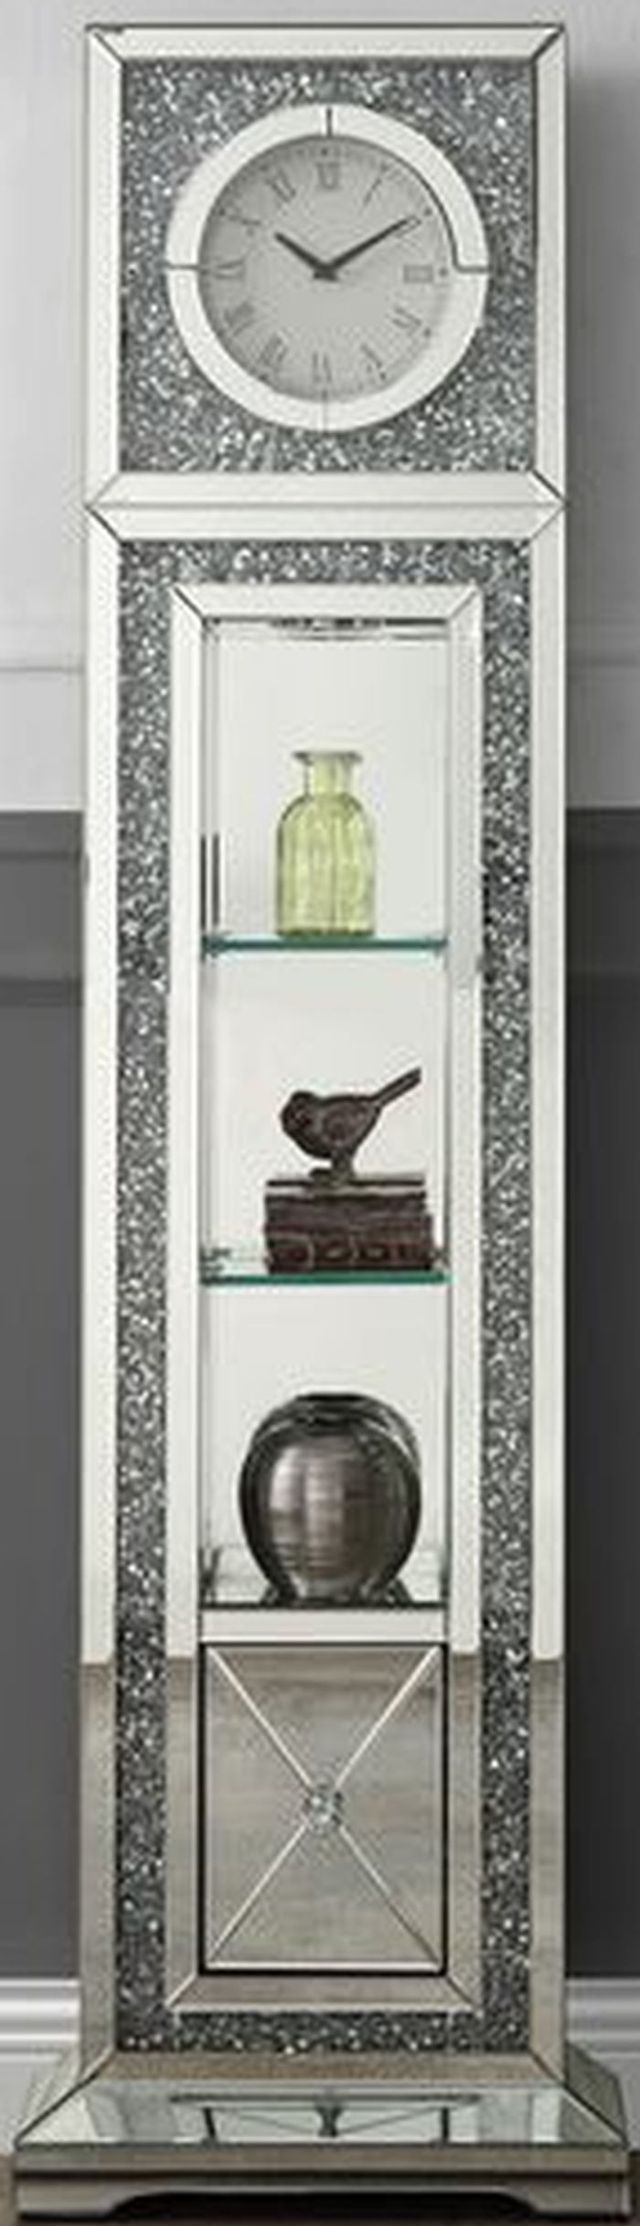 ACME Furniture Noralie Mirrored Grandfather Clock with Three Shelves and One Drawer